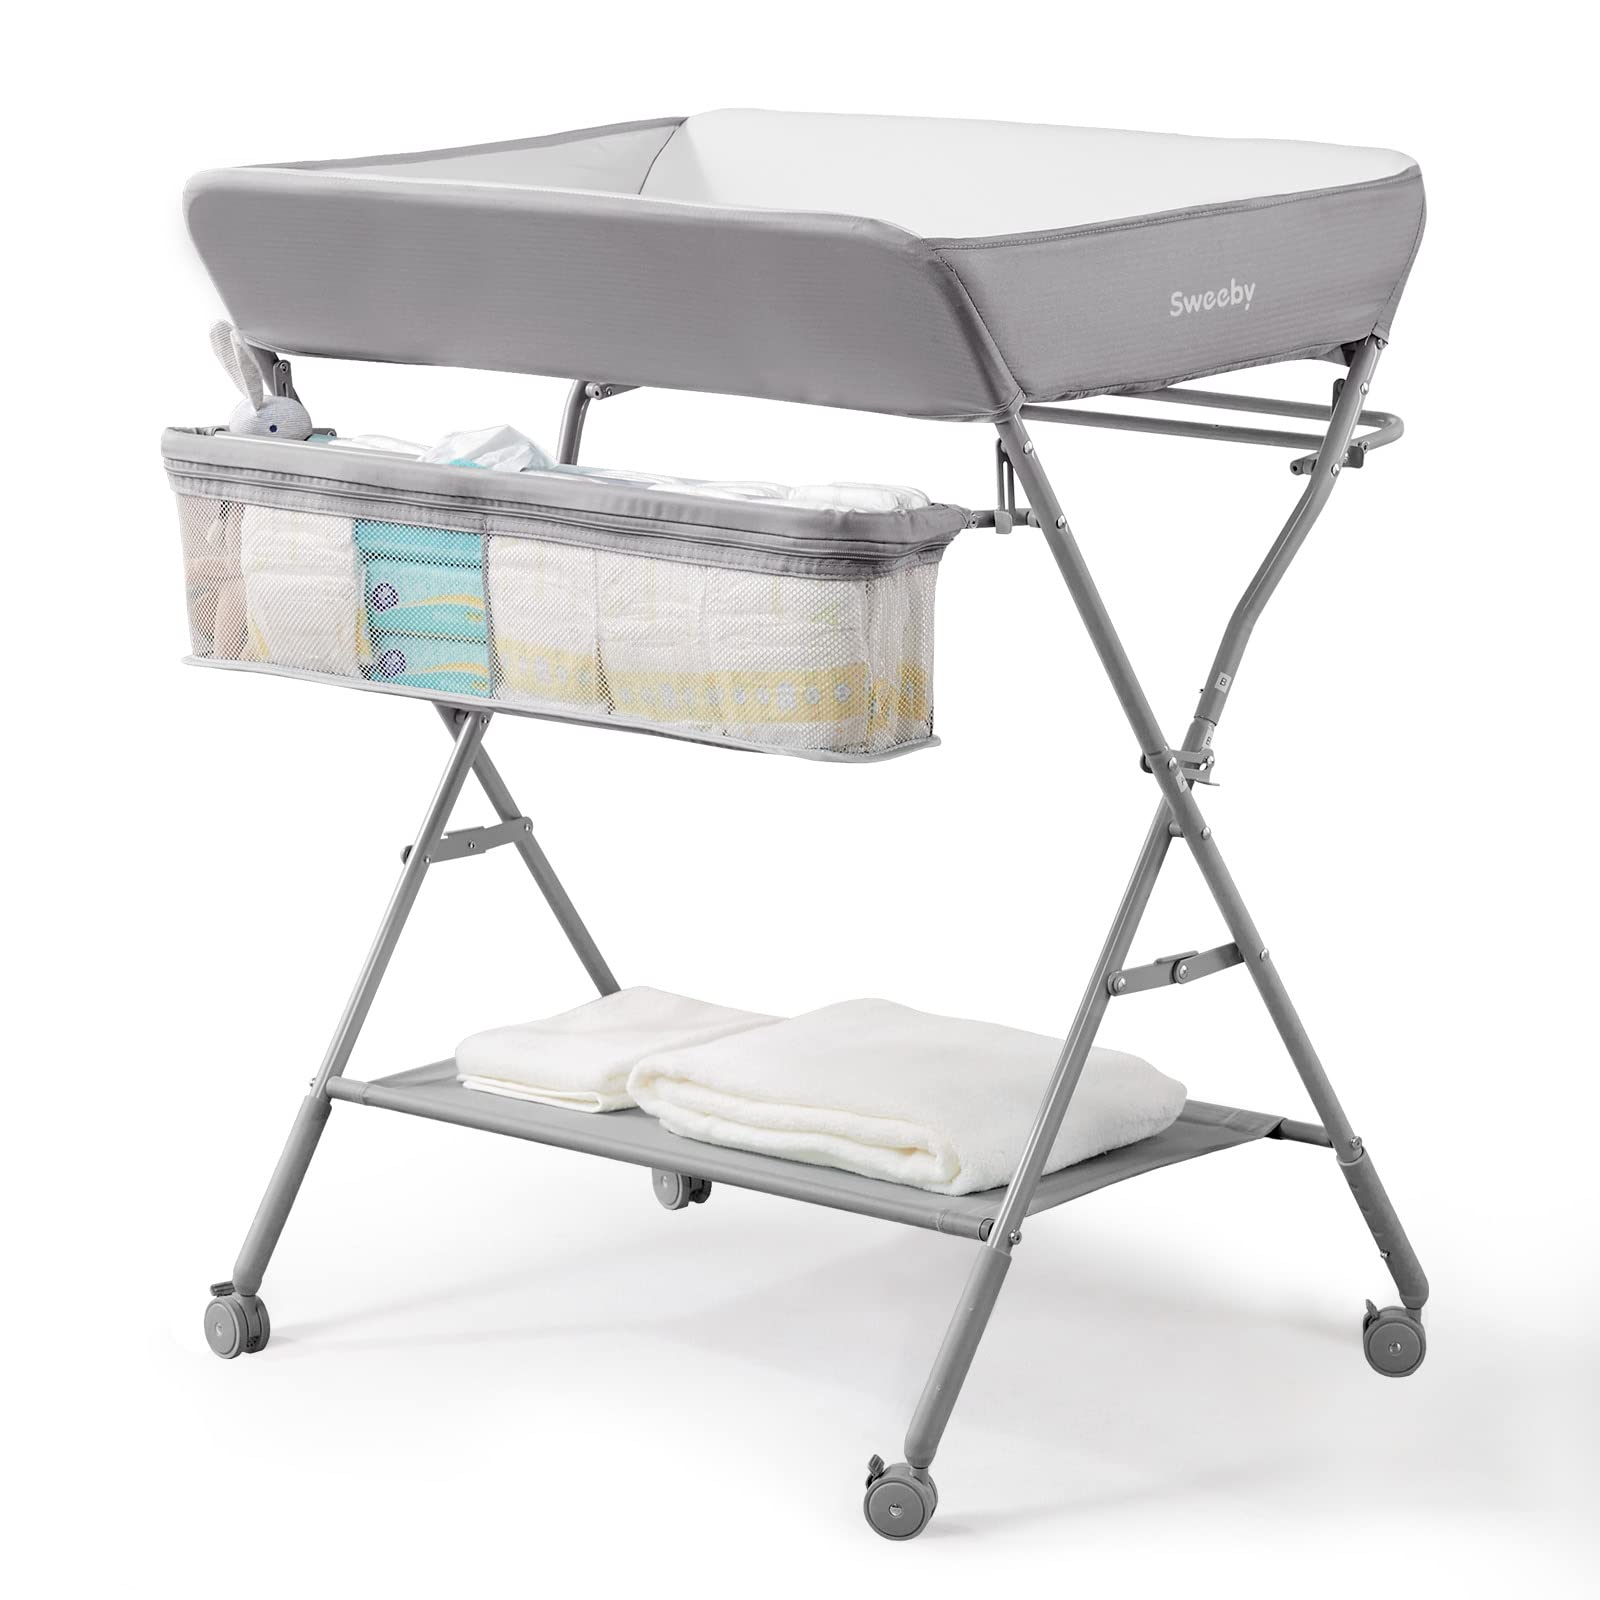 Sweeby Infant Changing Table with Changing Pad, Changing Table Portable Pad Nursery Furniture Baby Changing Station, Gray